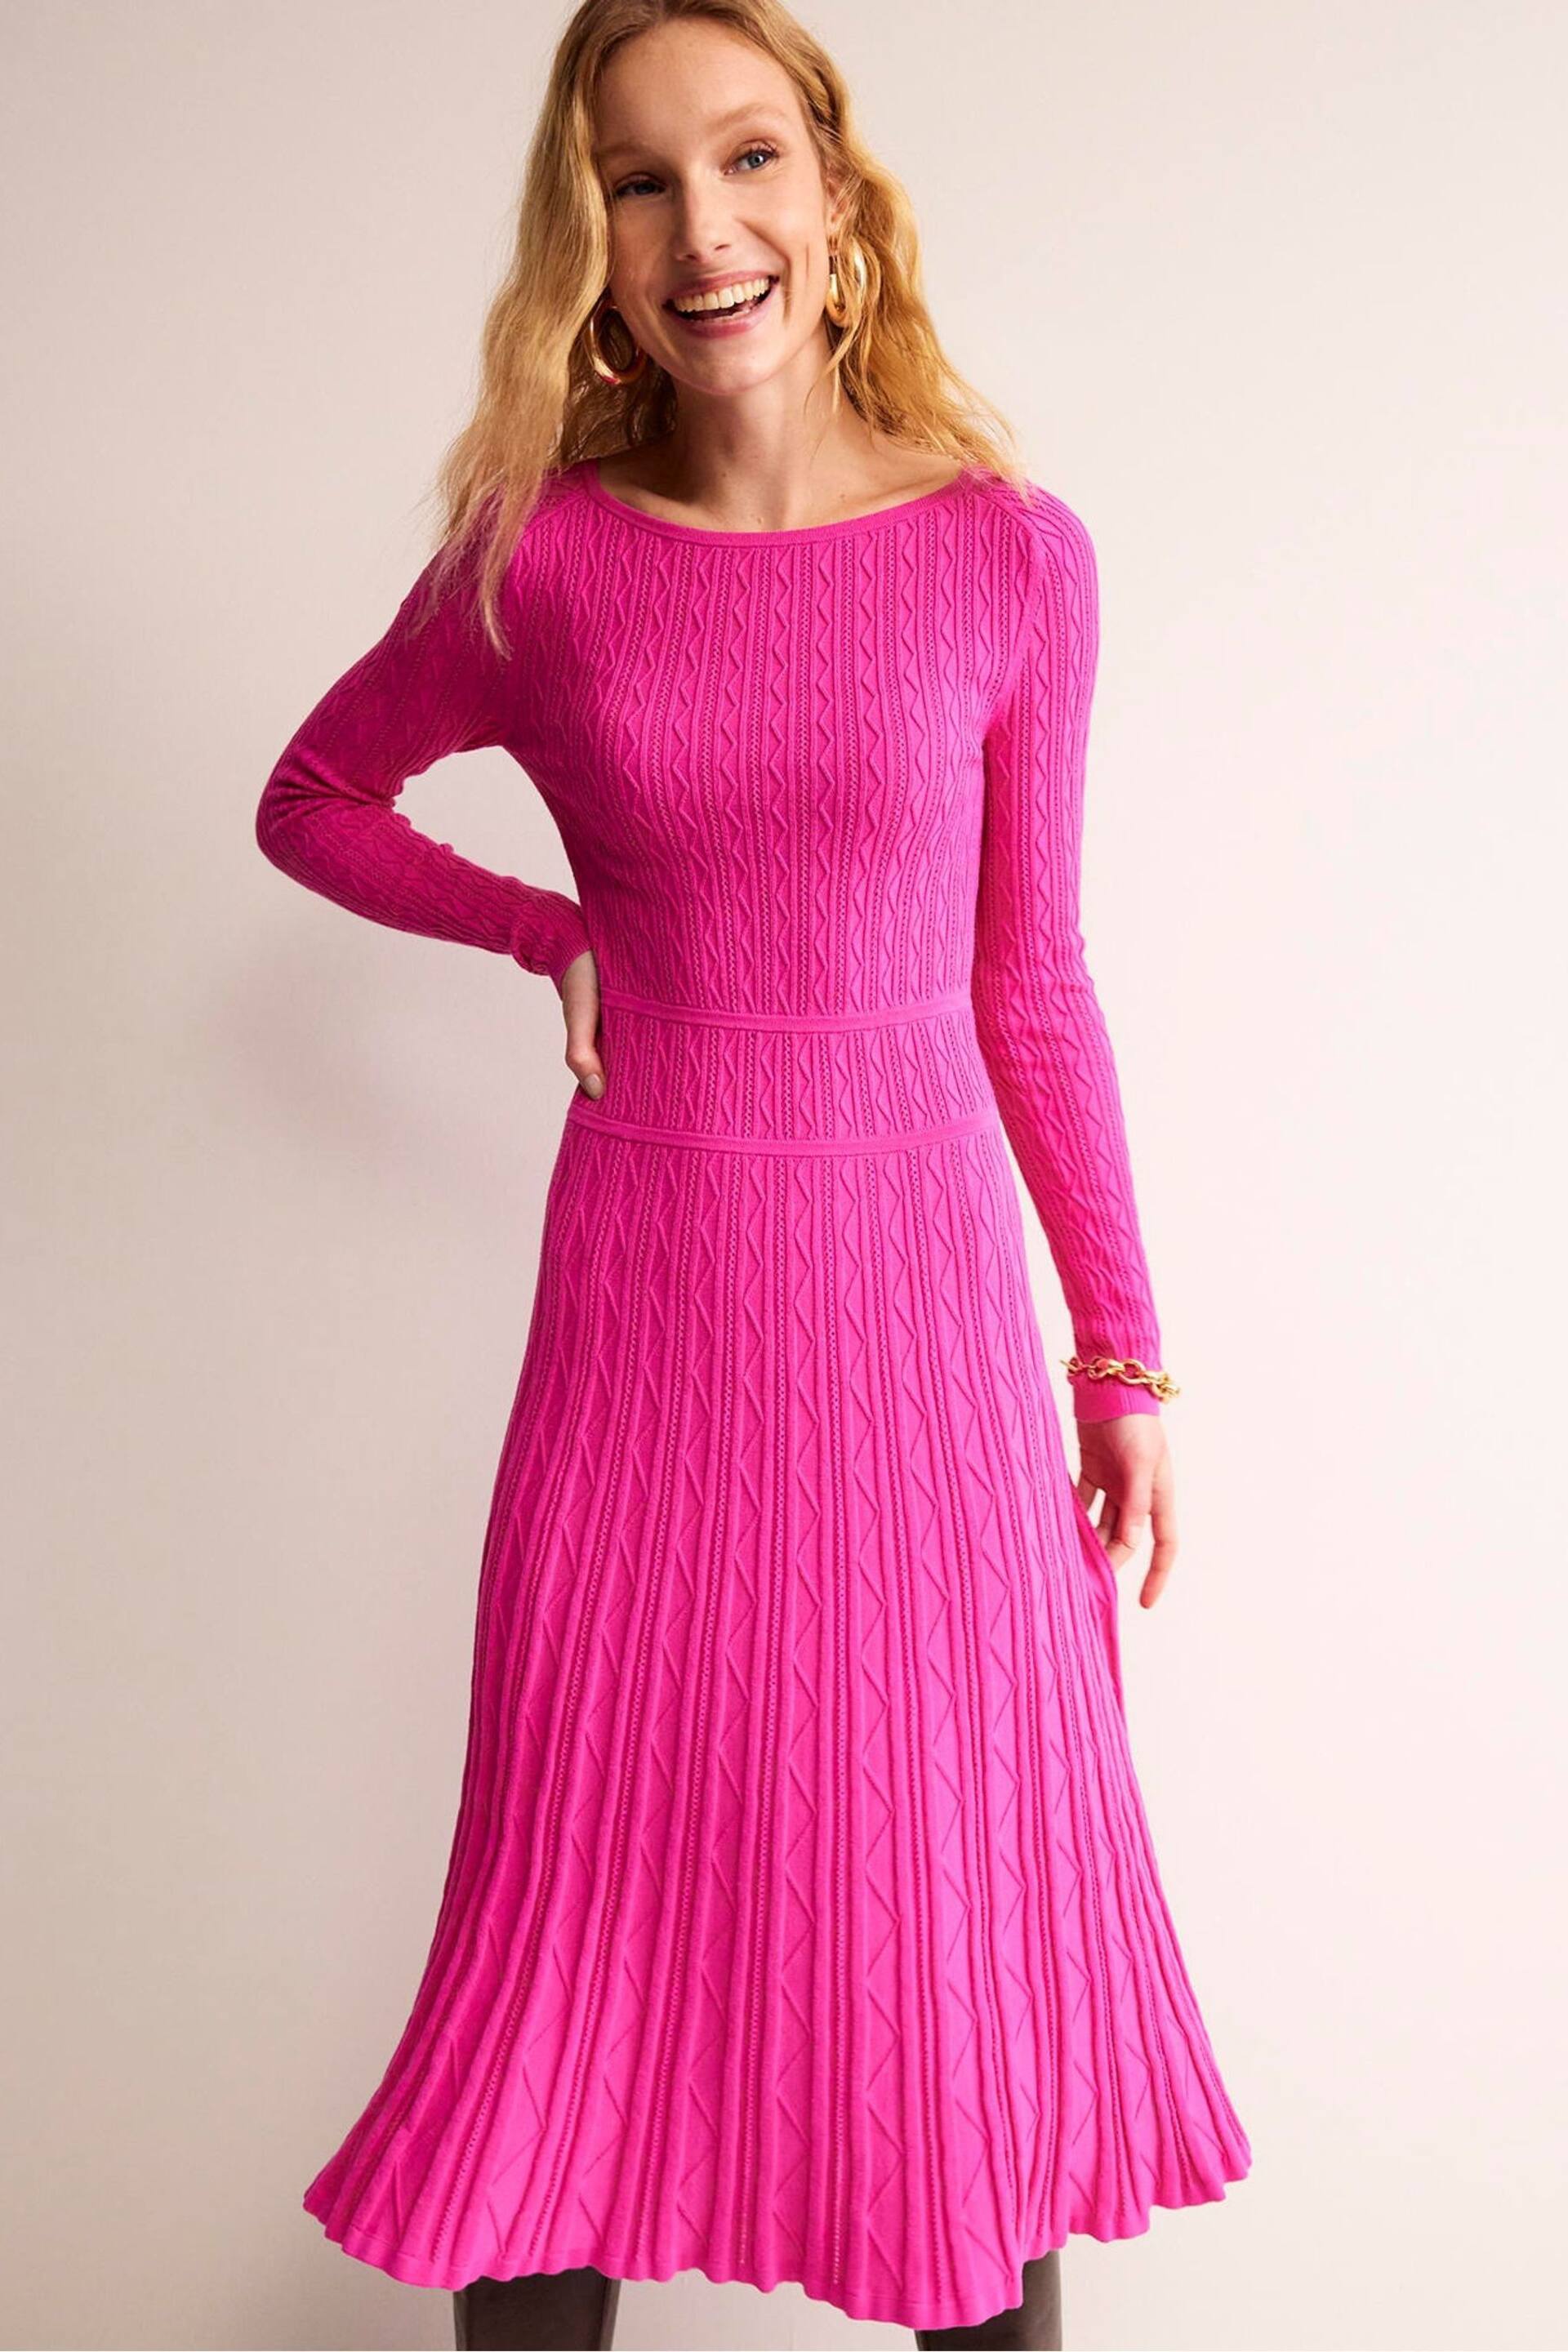 Boden Pink Imogen Empire Knitted Dress - Image 1 of 6